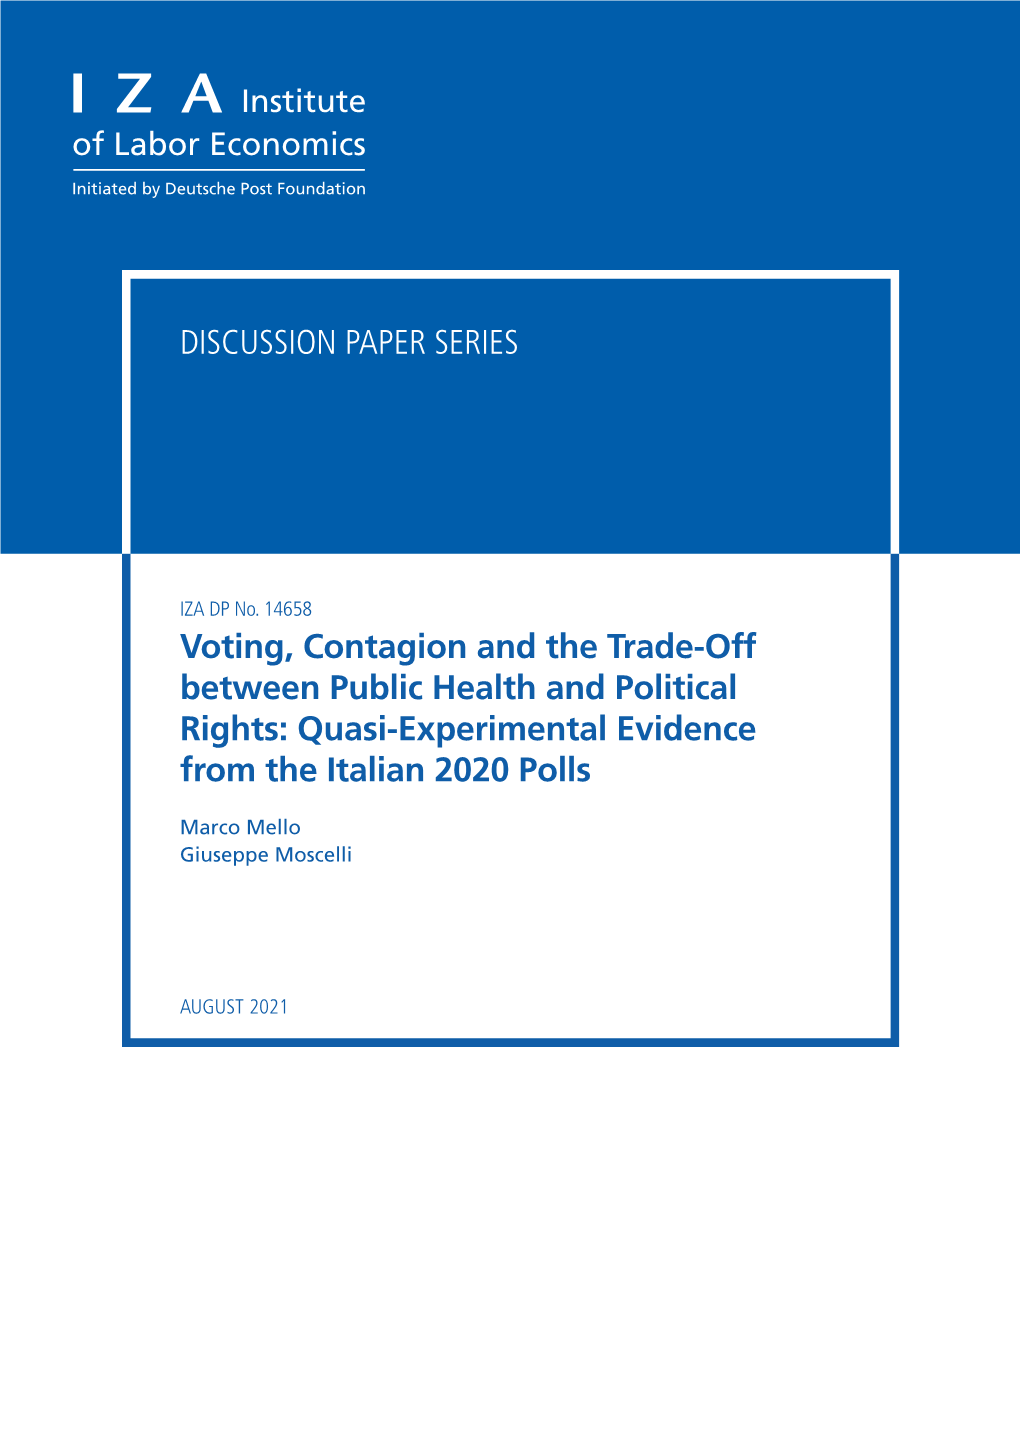 Voting, Contagion and the Trade-Off Between Public Health and Political Rights: Quasi-Experimental Evidence from the Italian 2020 Polls